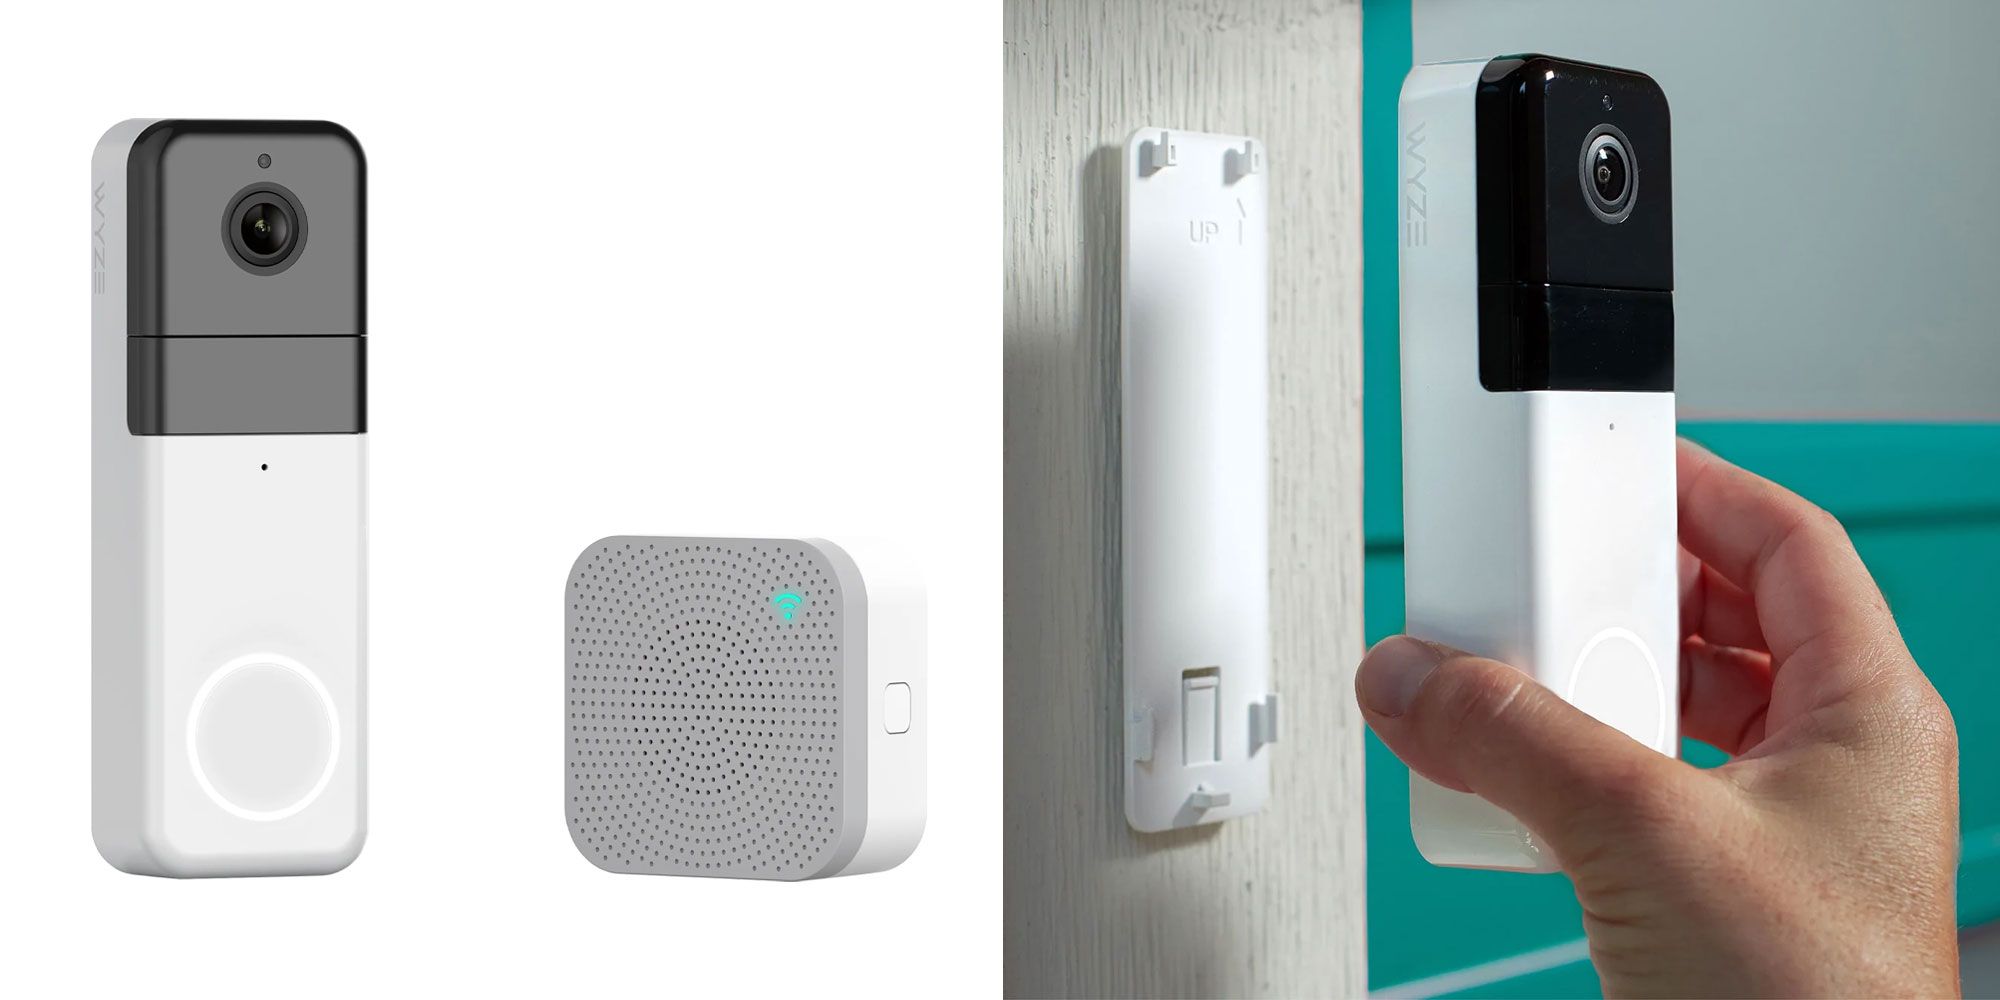 Product images of theWyze Video Doorbell Pro.